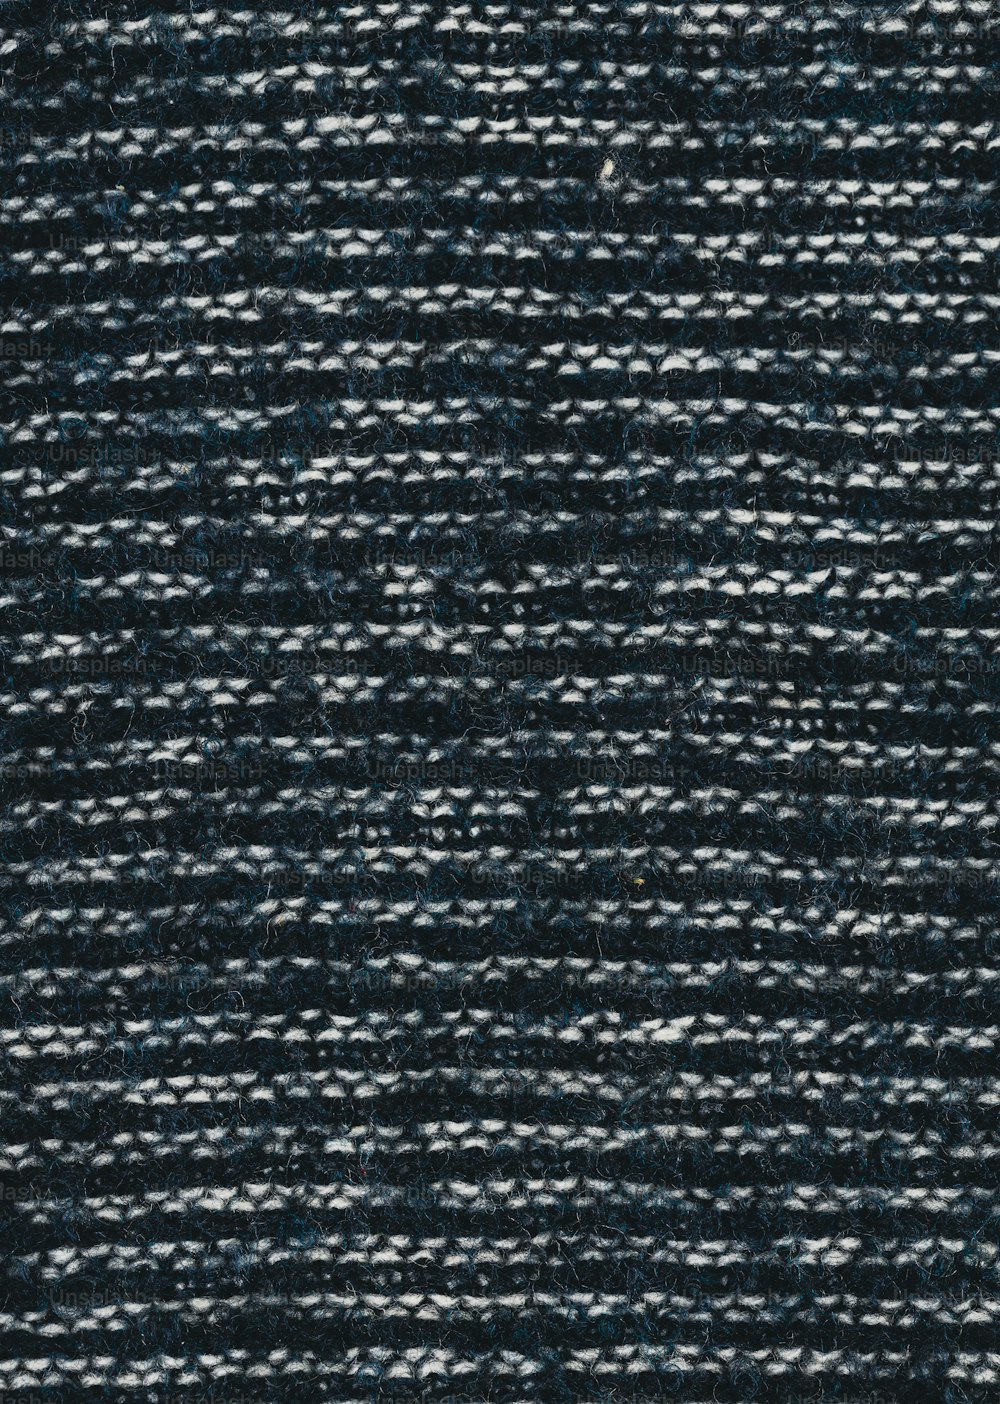 a close up of a black and white textured fabric